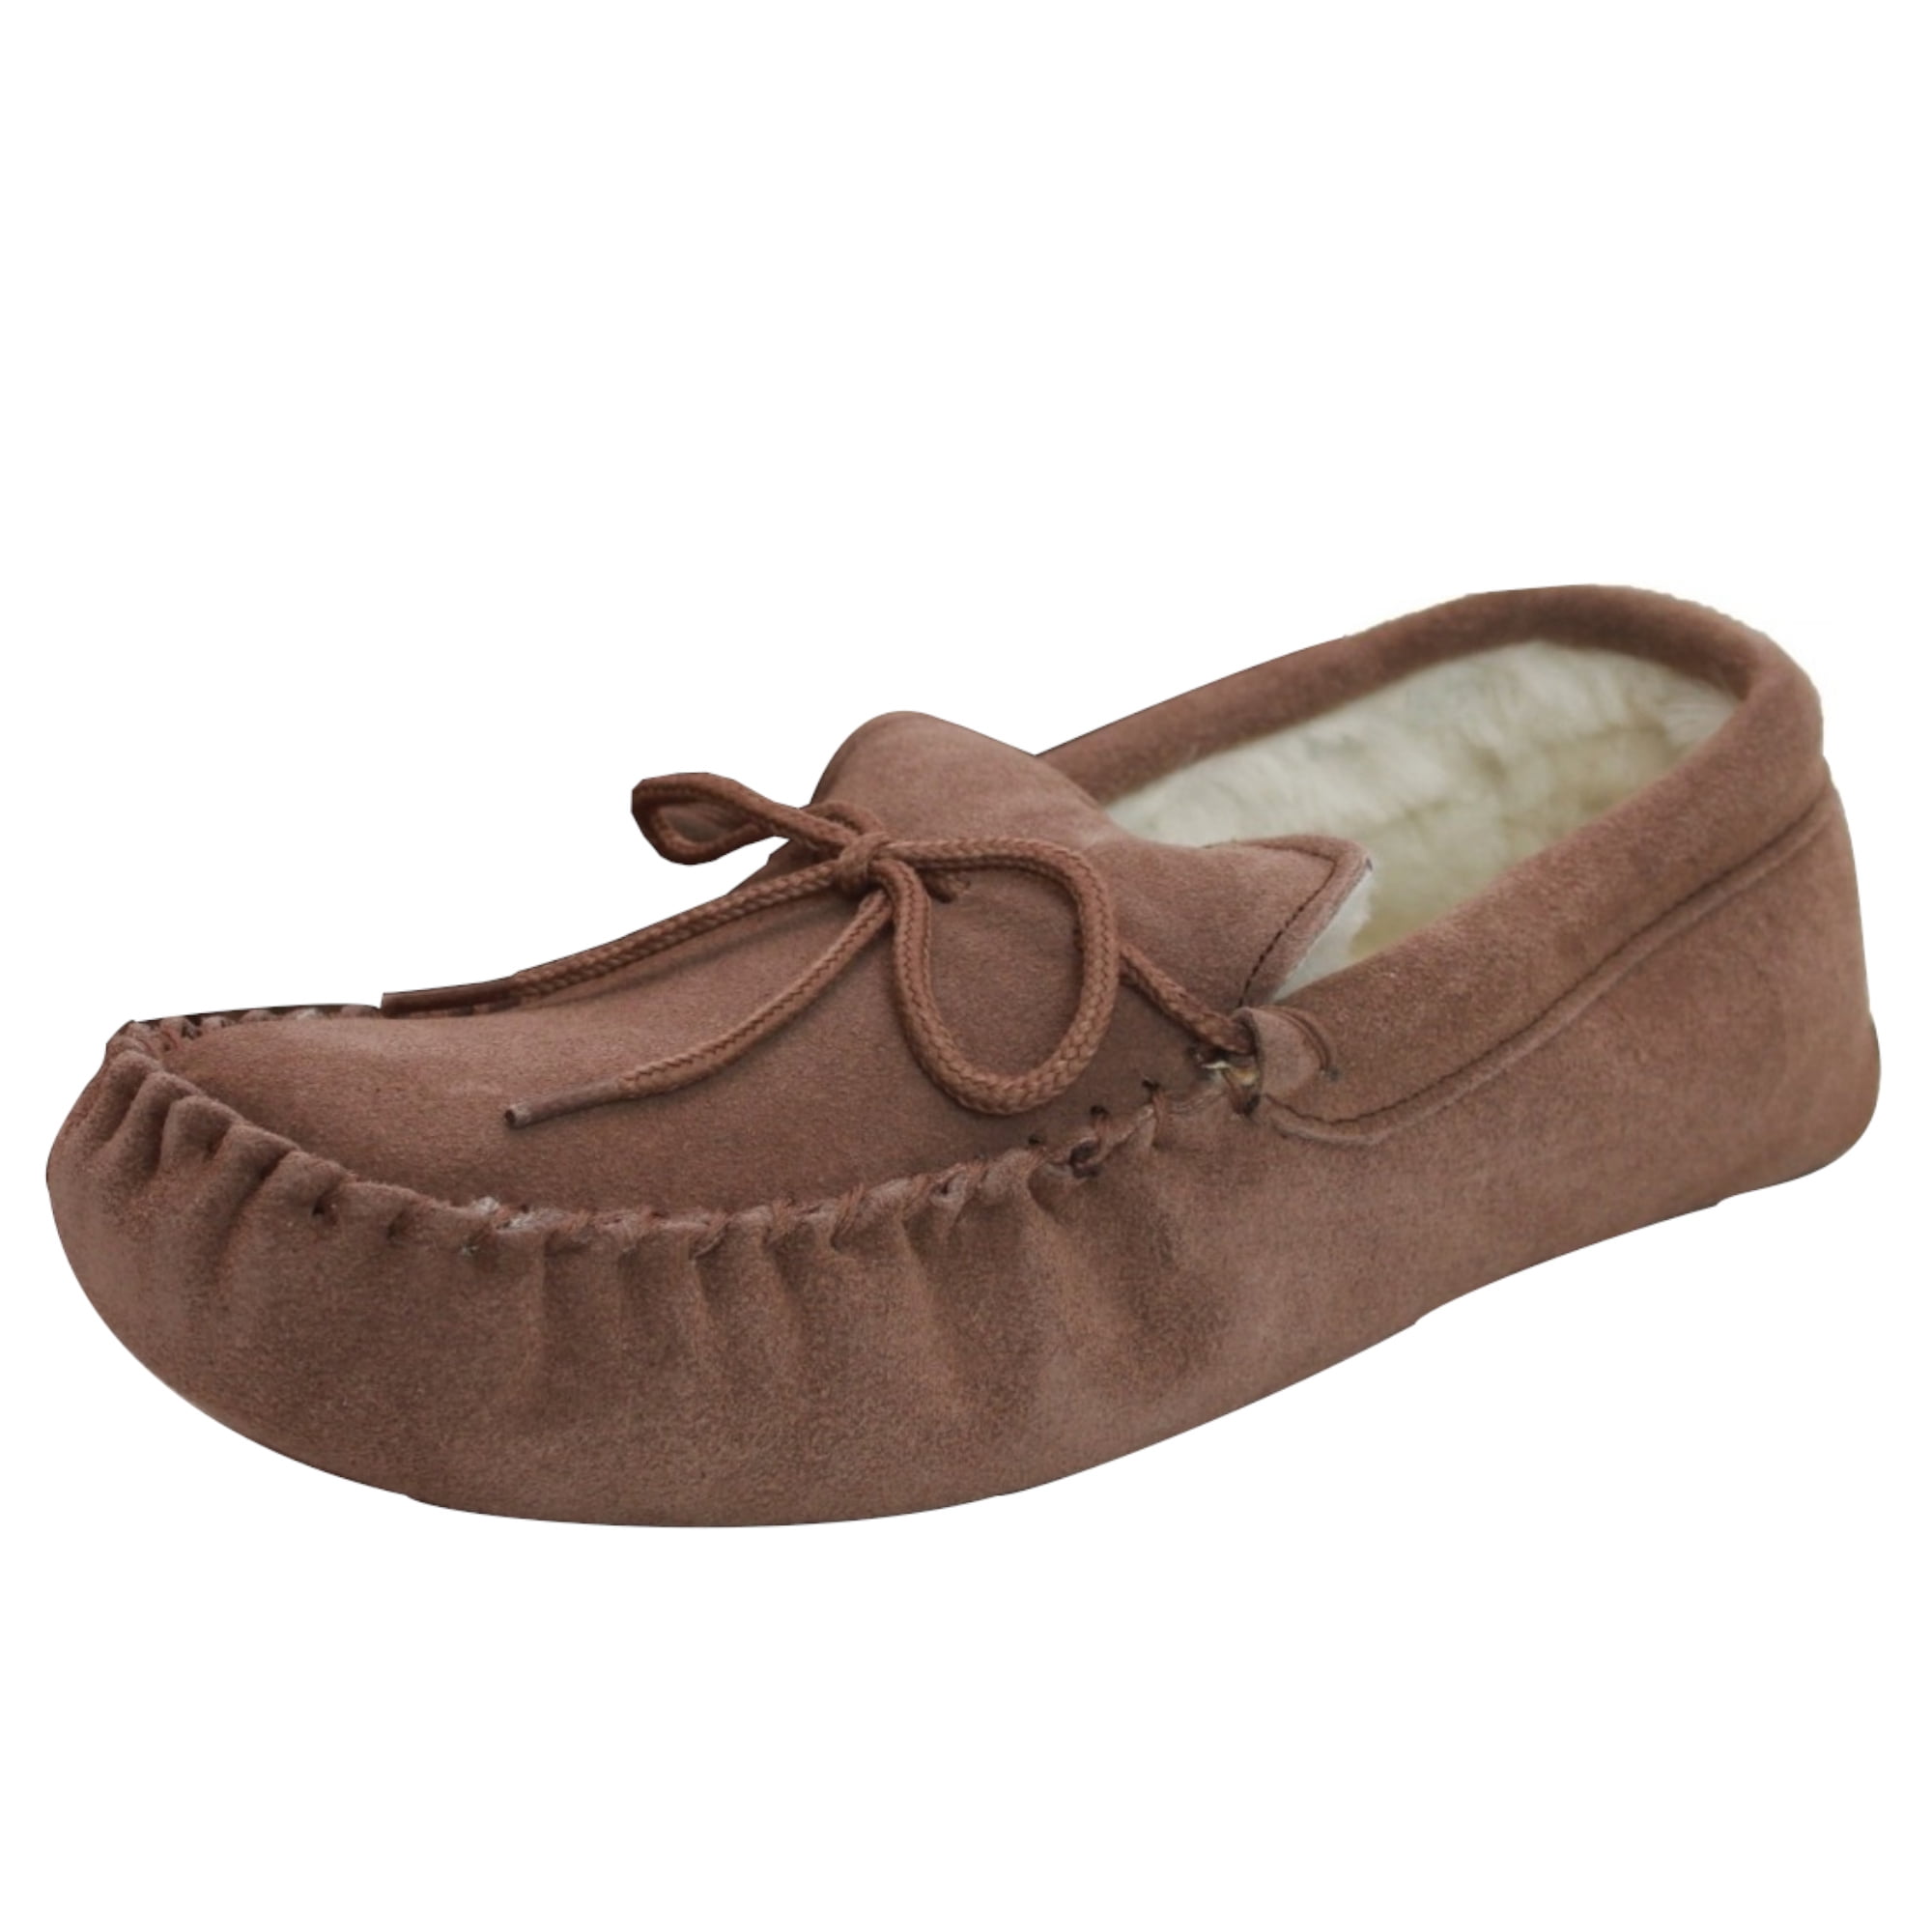 Eastern Counties Leather Childrens/Kids Wool-Blend Lined Moccasin Slippers 